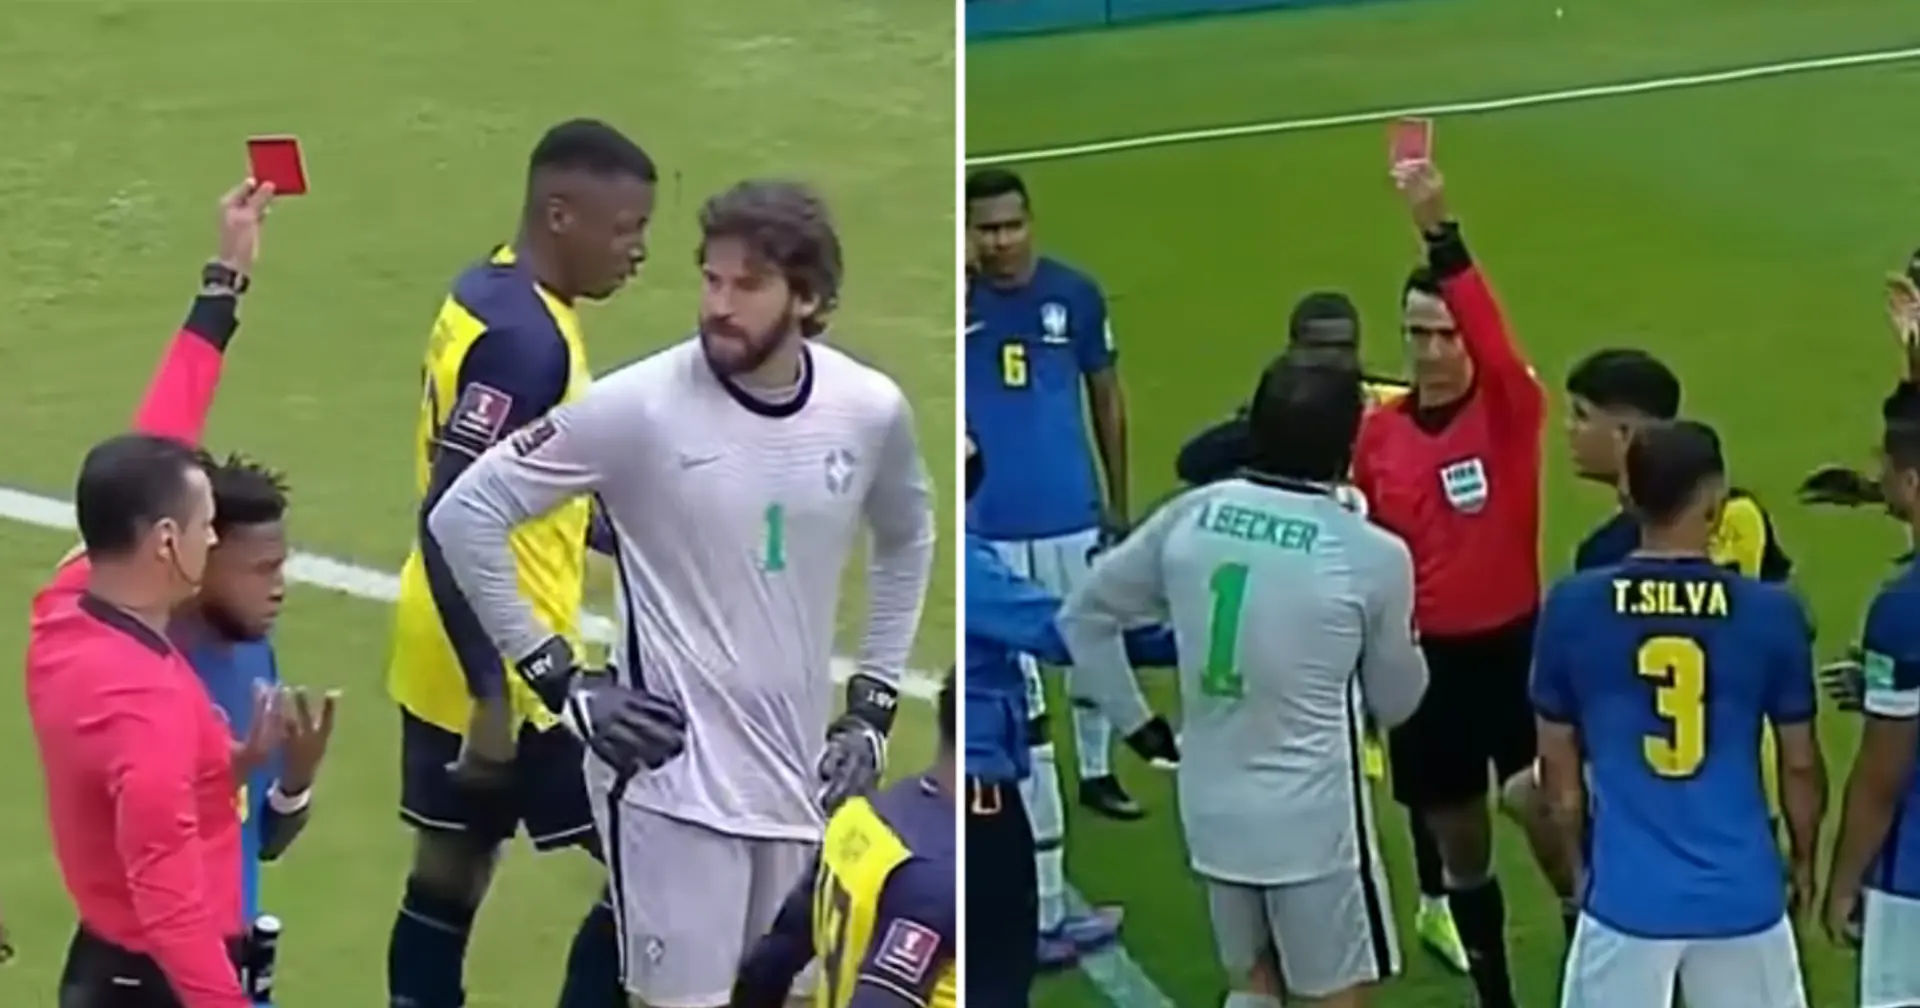 Alisson receives two red cards in one game for Brazil - VAR overturns both calls